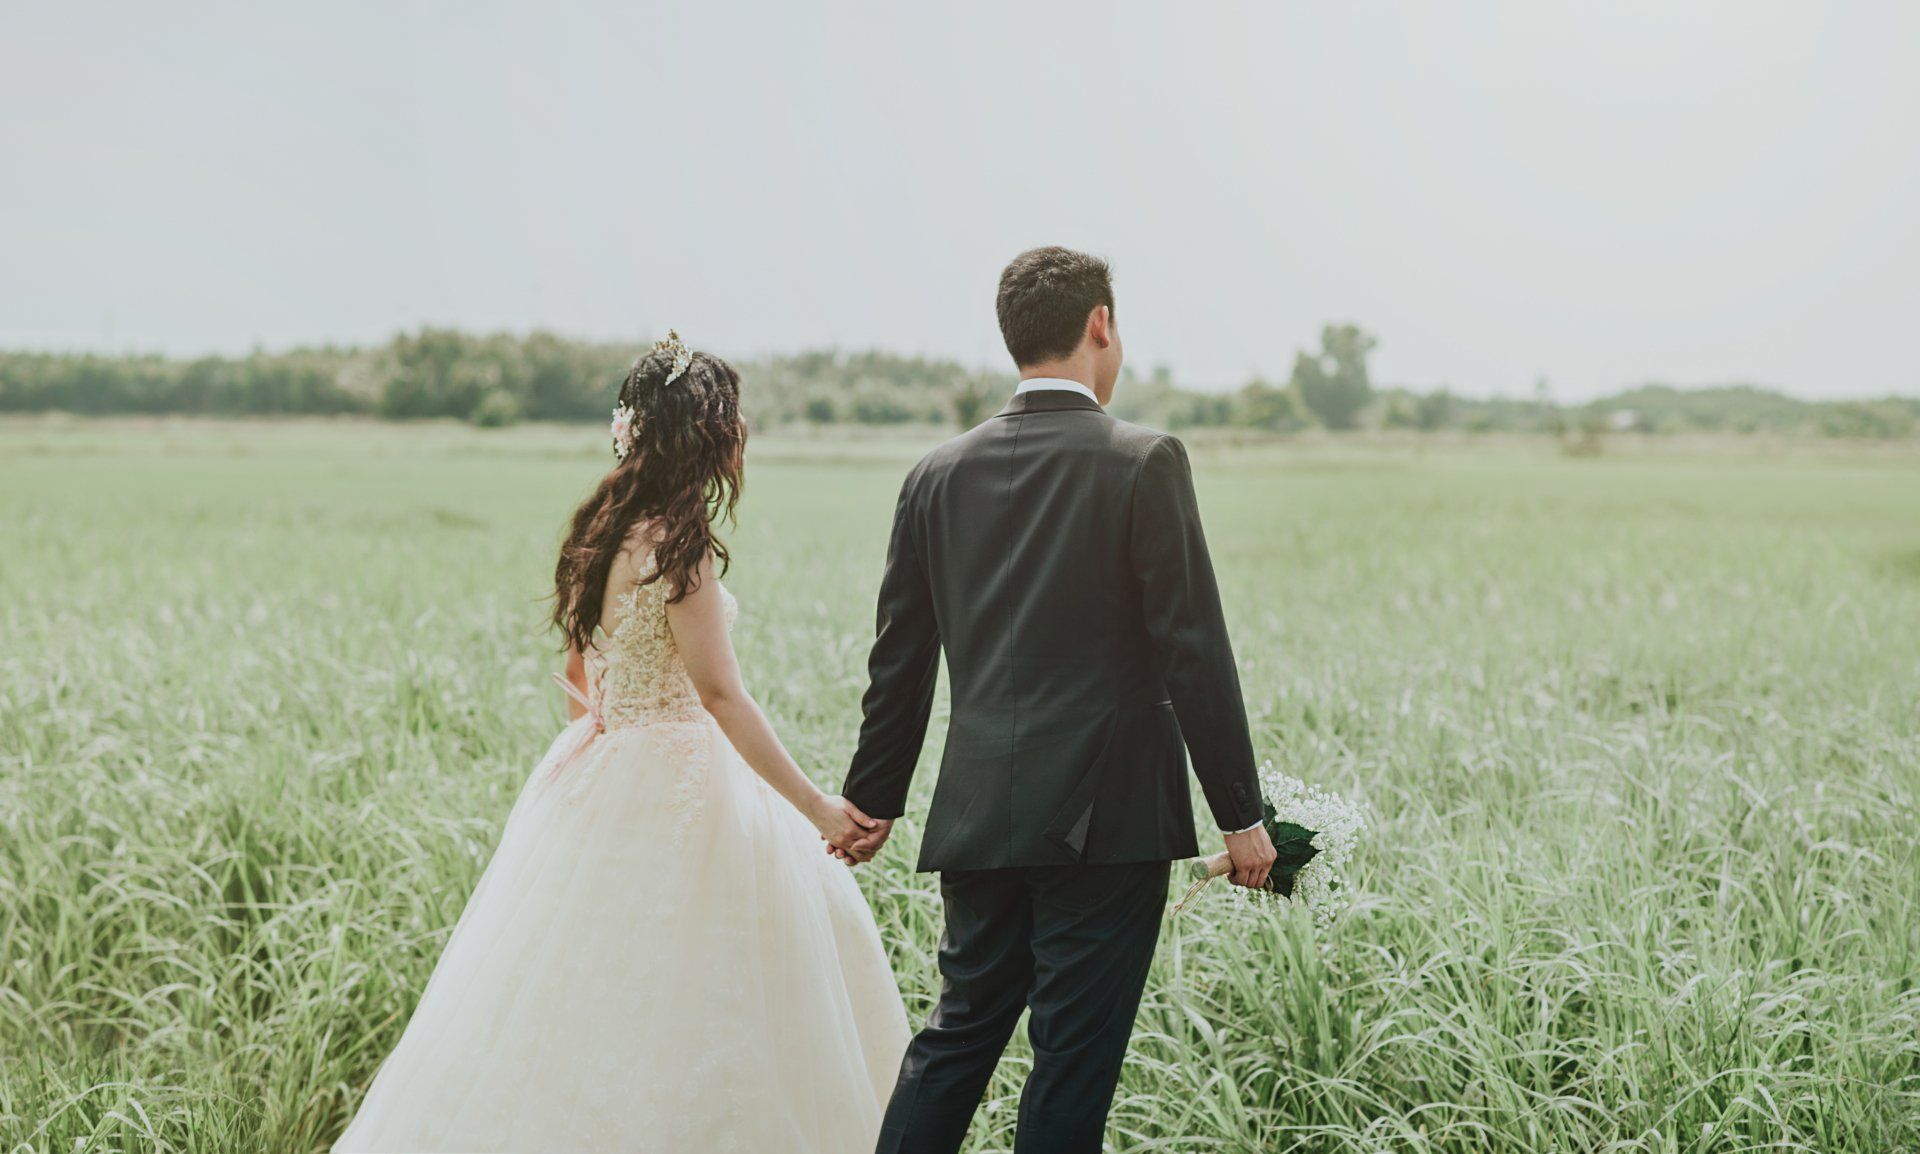 A bride and groom are walking through a grassy field holding hands.